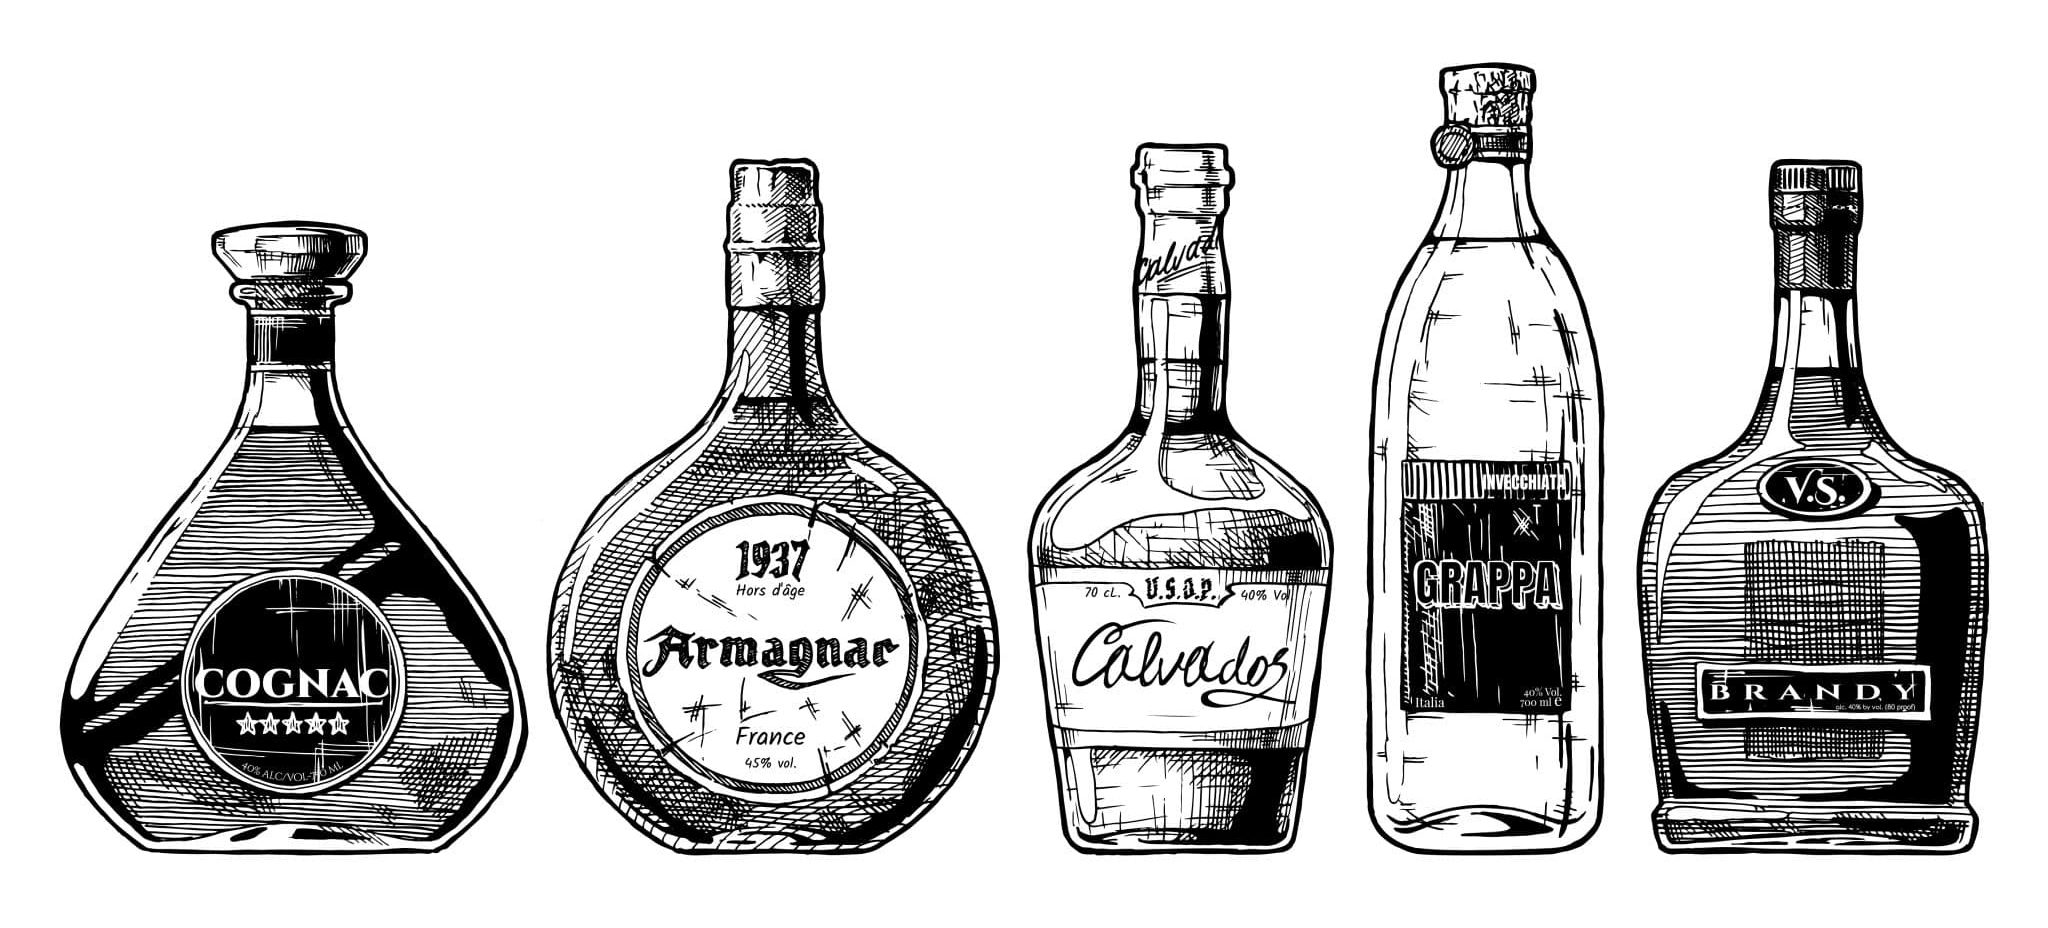 Drawings of five bottles labeled Cognac, Armagnac, Calvados, Grappa, and Brandy showing different shapes and styles of brandy.